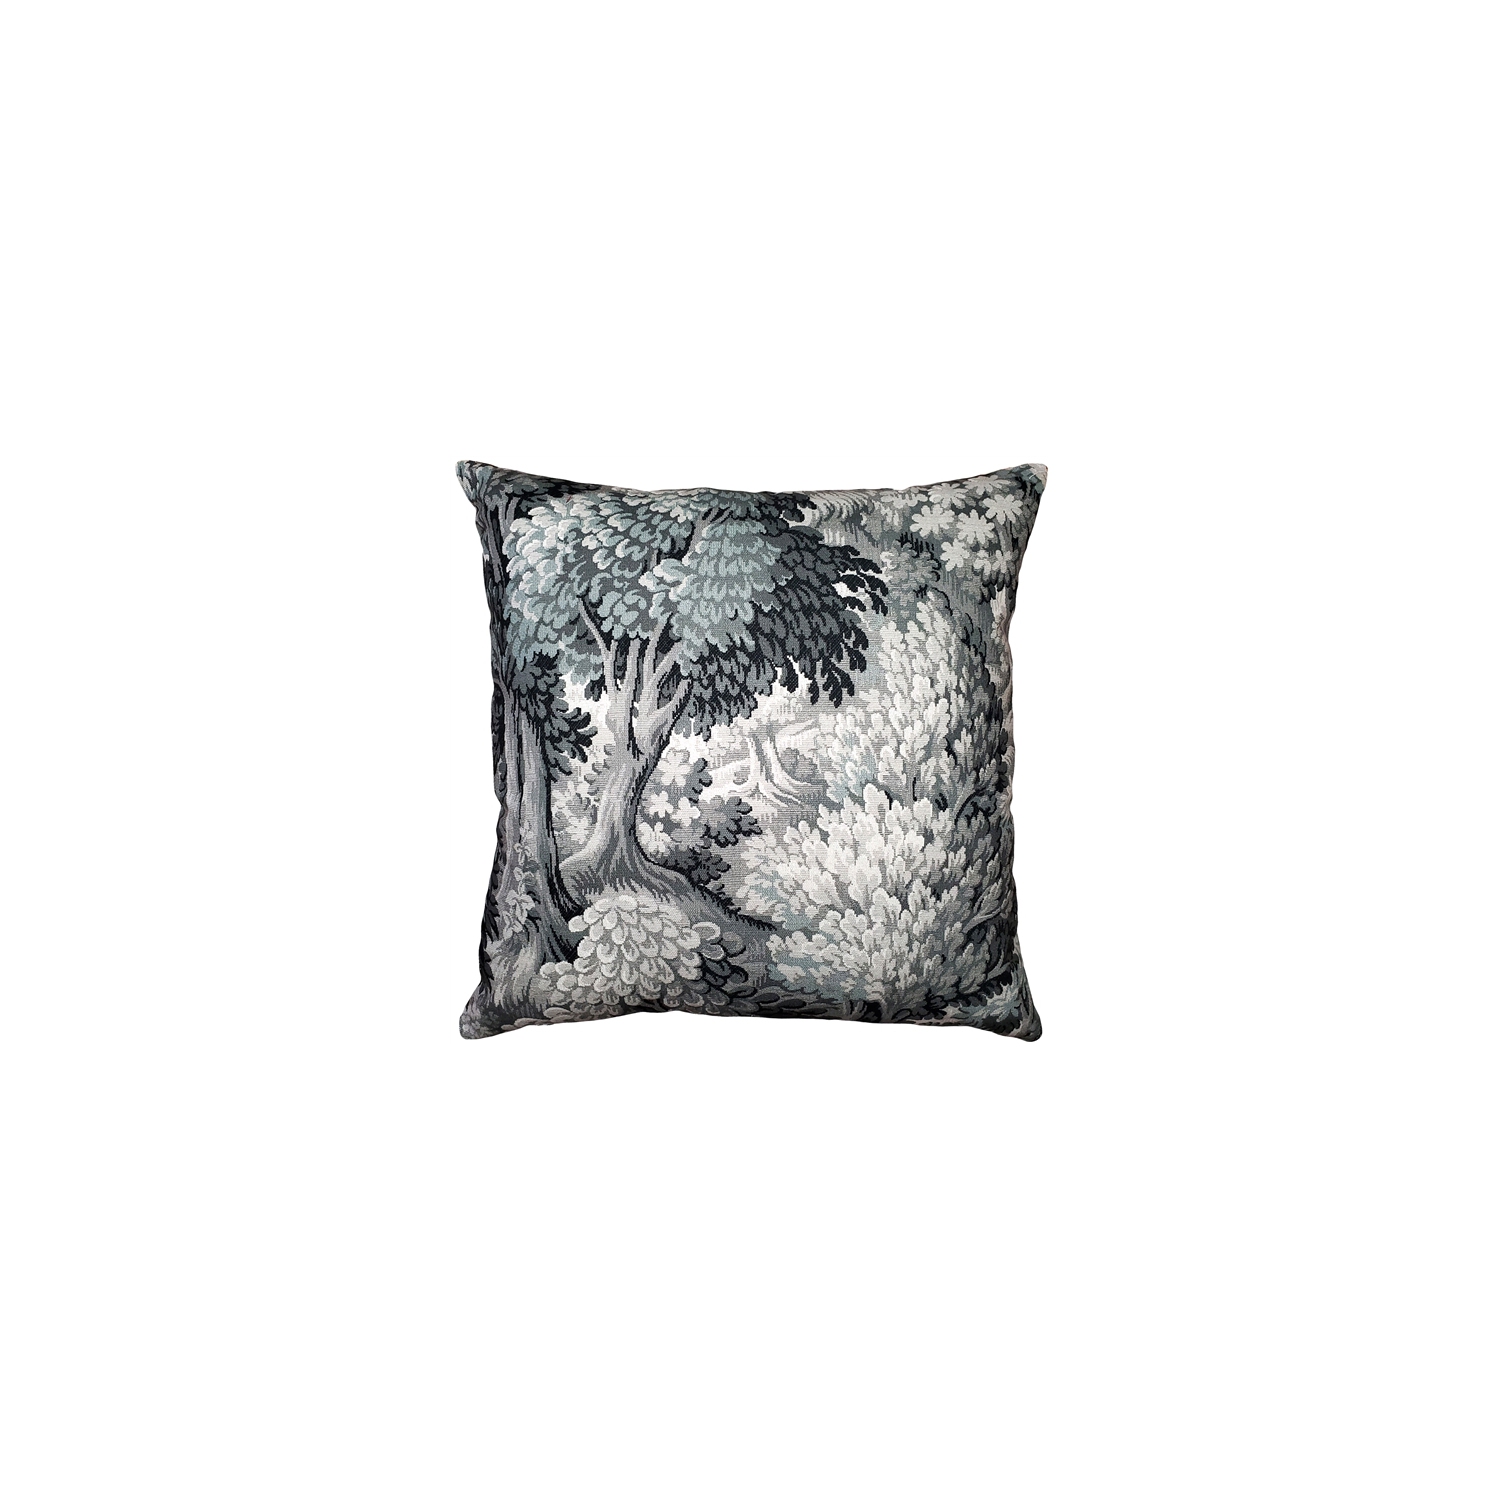 Somerset Woods by Night Throw Pillow, 24"x24" (Polyfill Insert Included)